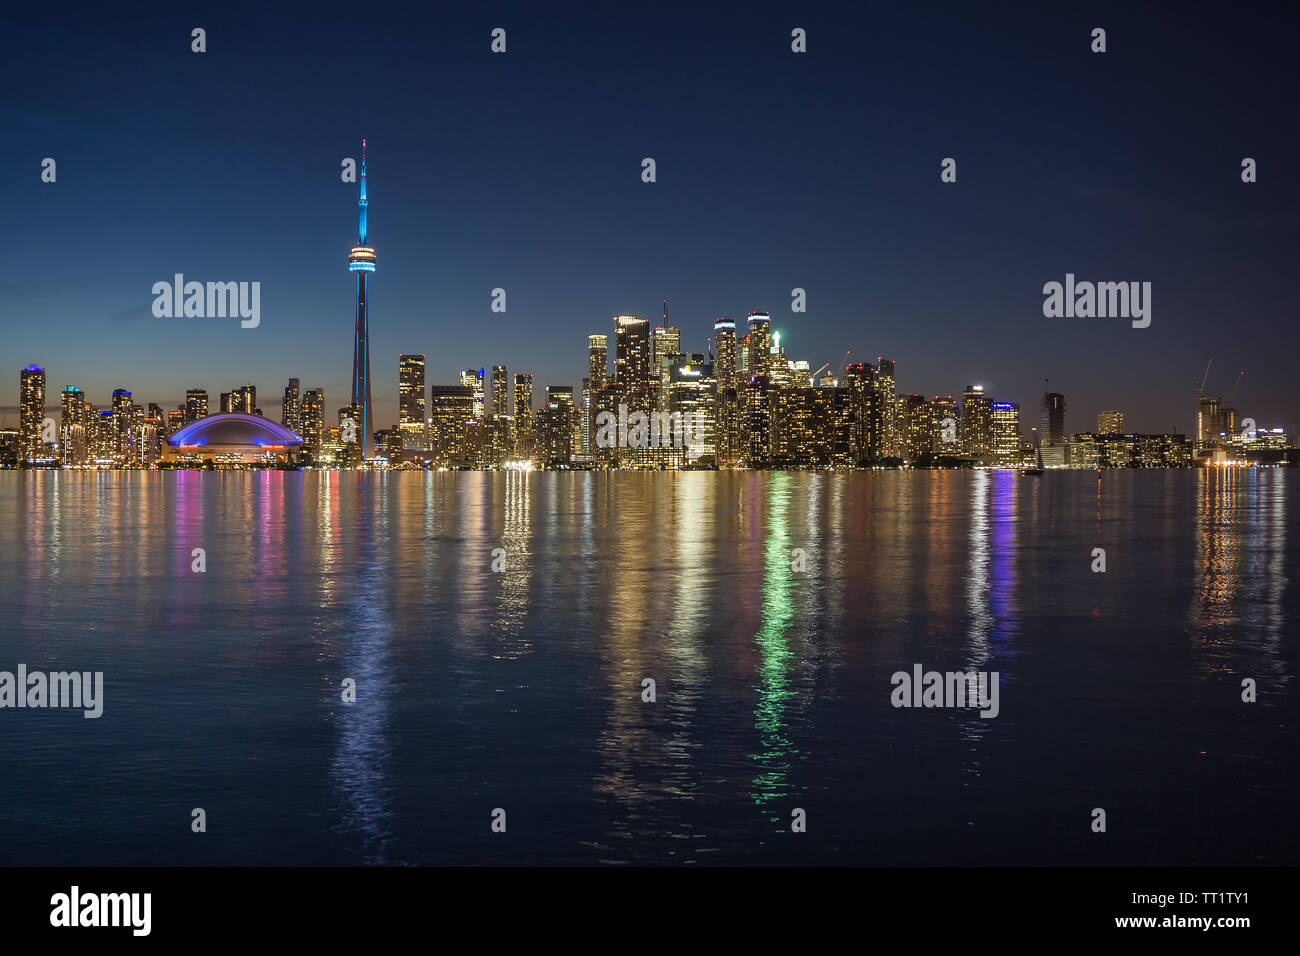 Canada, Toronto, skyline with the CN Tower, view of flooded island in the blue hour, water reflections, June 2019 Stock Photo